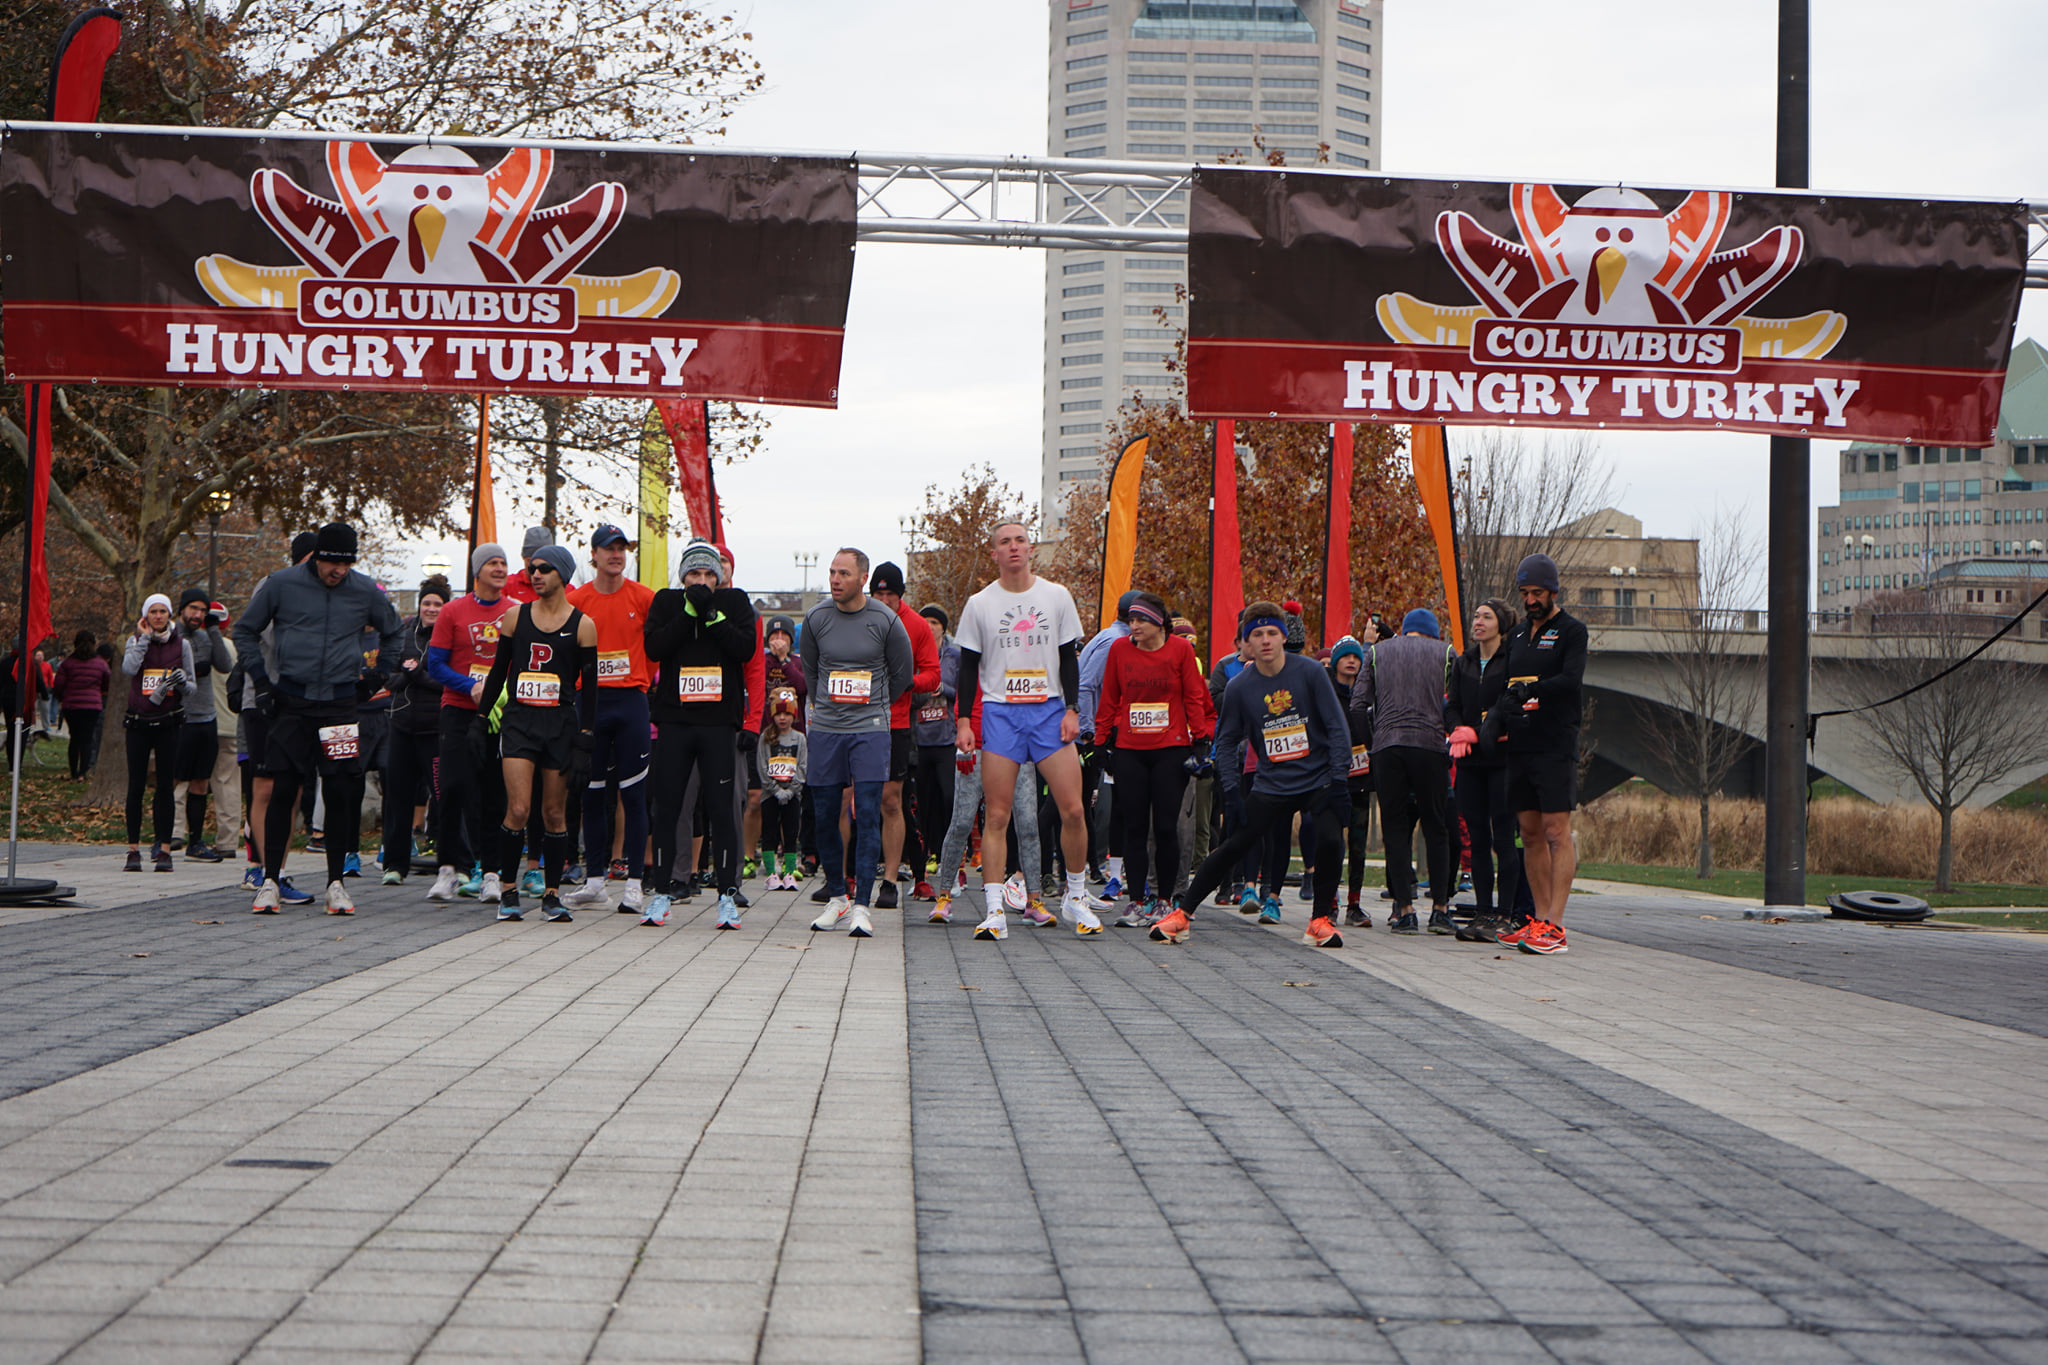 Columbus Hungry Turkey Trot Start Line - Chip Timed Race By USA Race Timing & Event Management - Columbus, Ohio Race Timing - 5k 10k Half Marathon